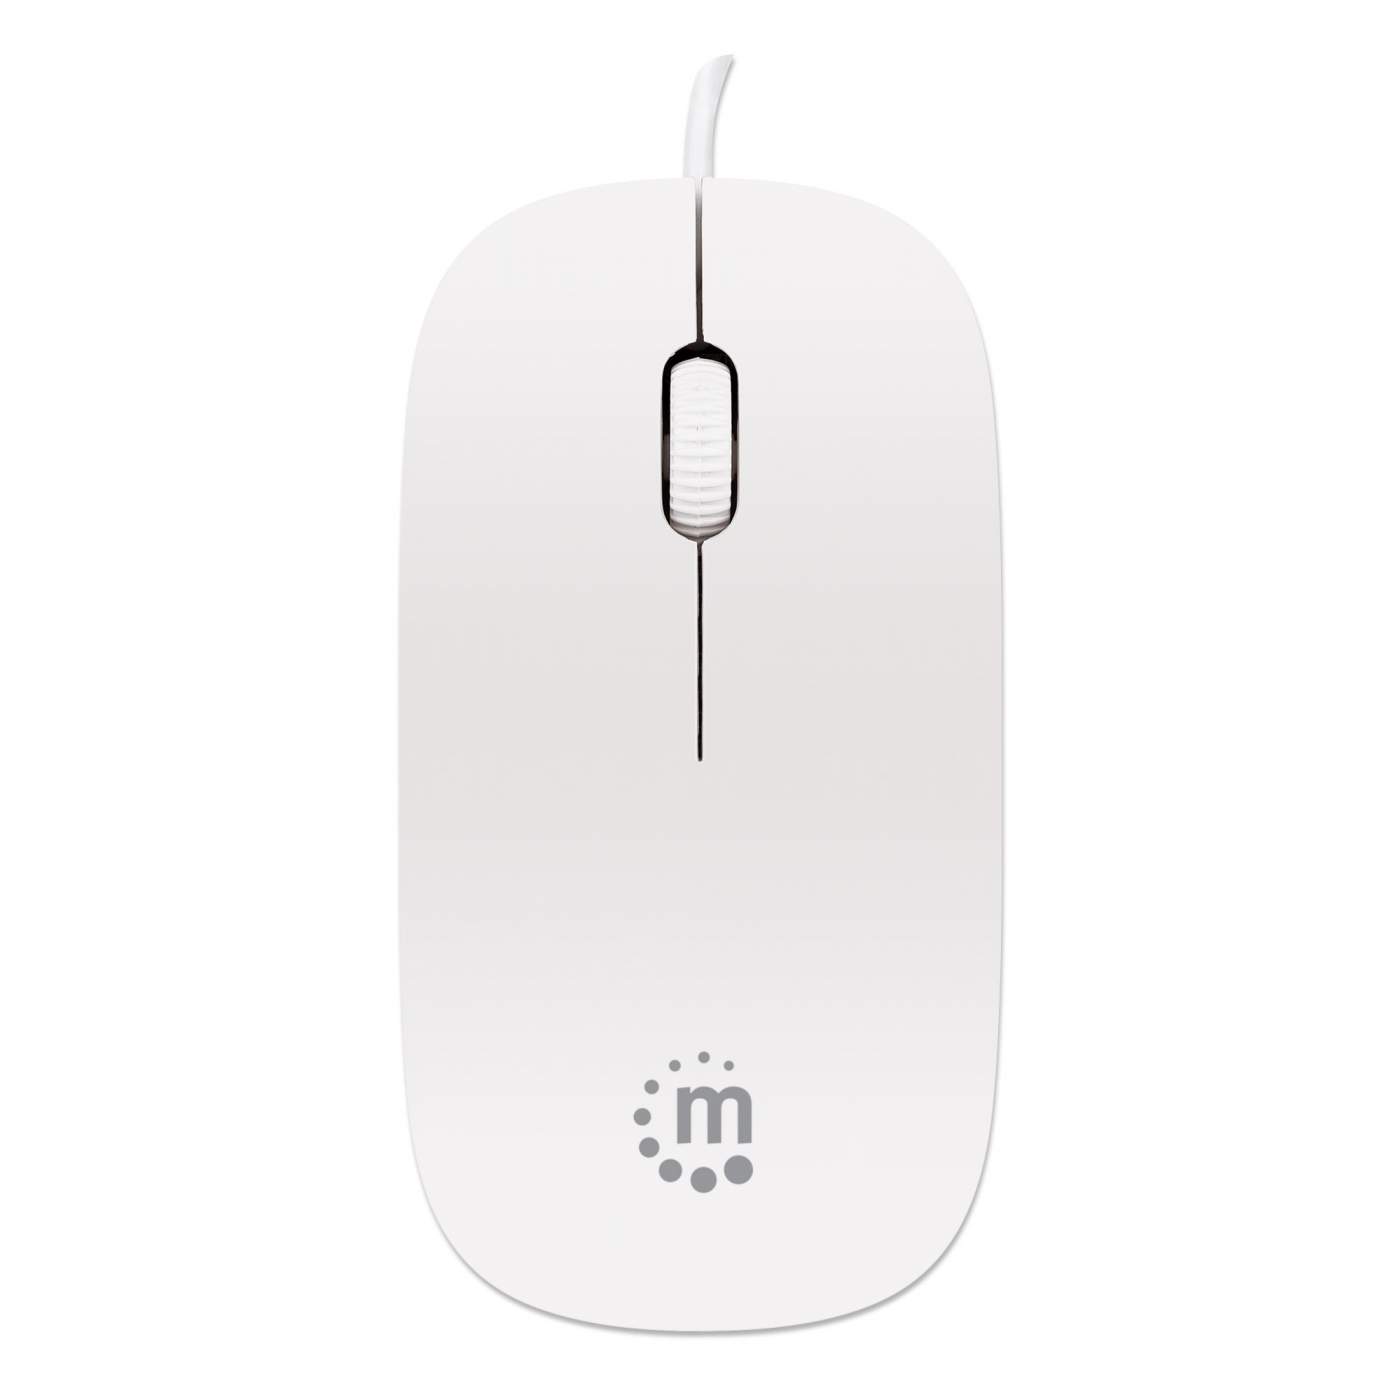 Silhouette Optical Mouse Image 3